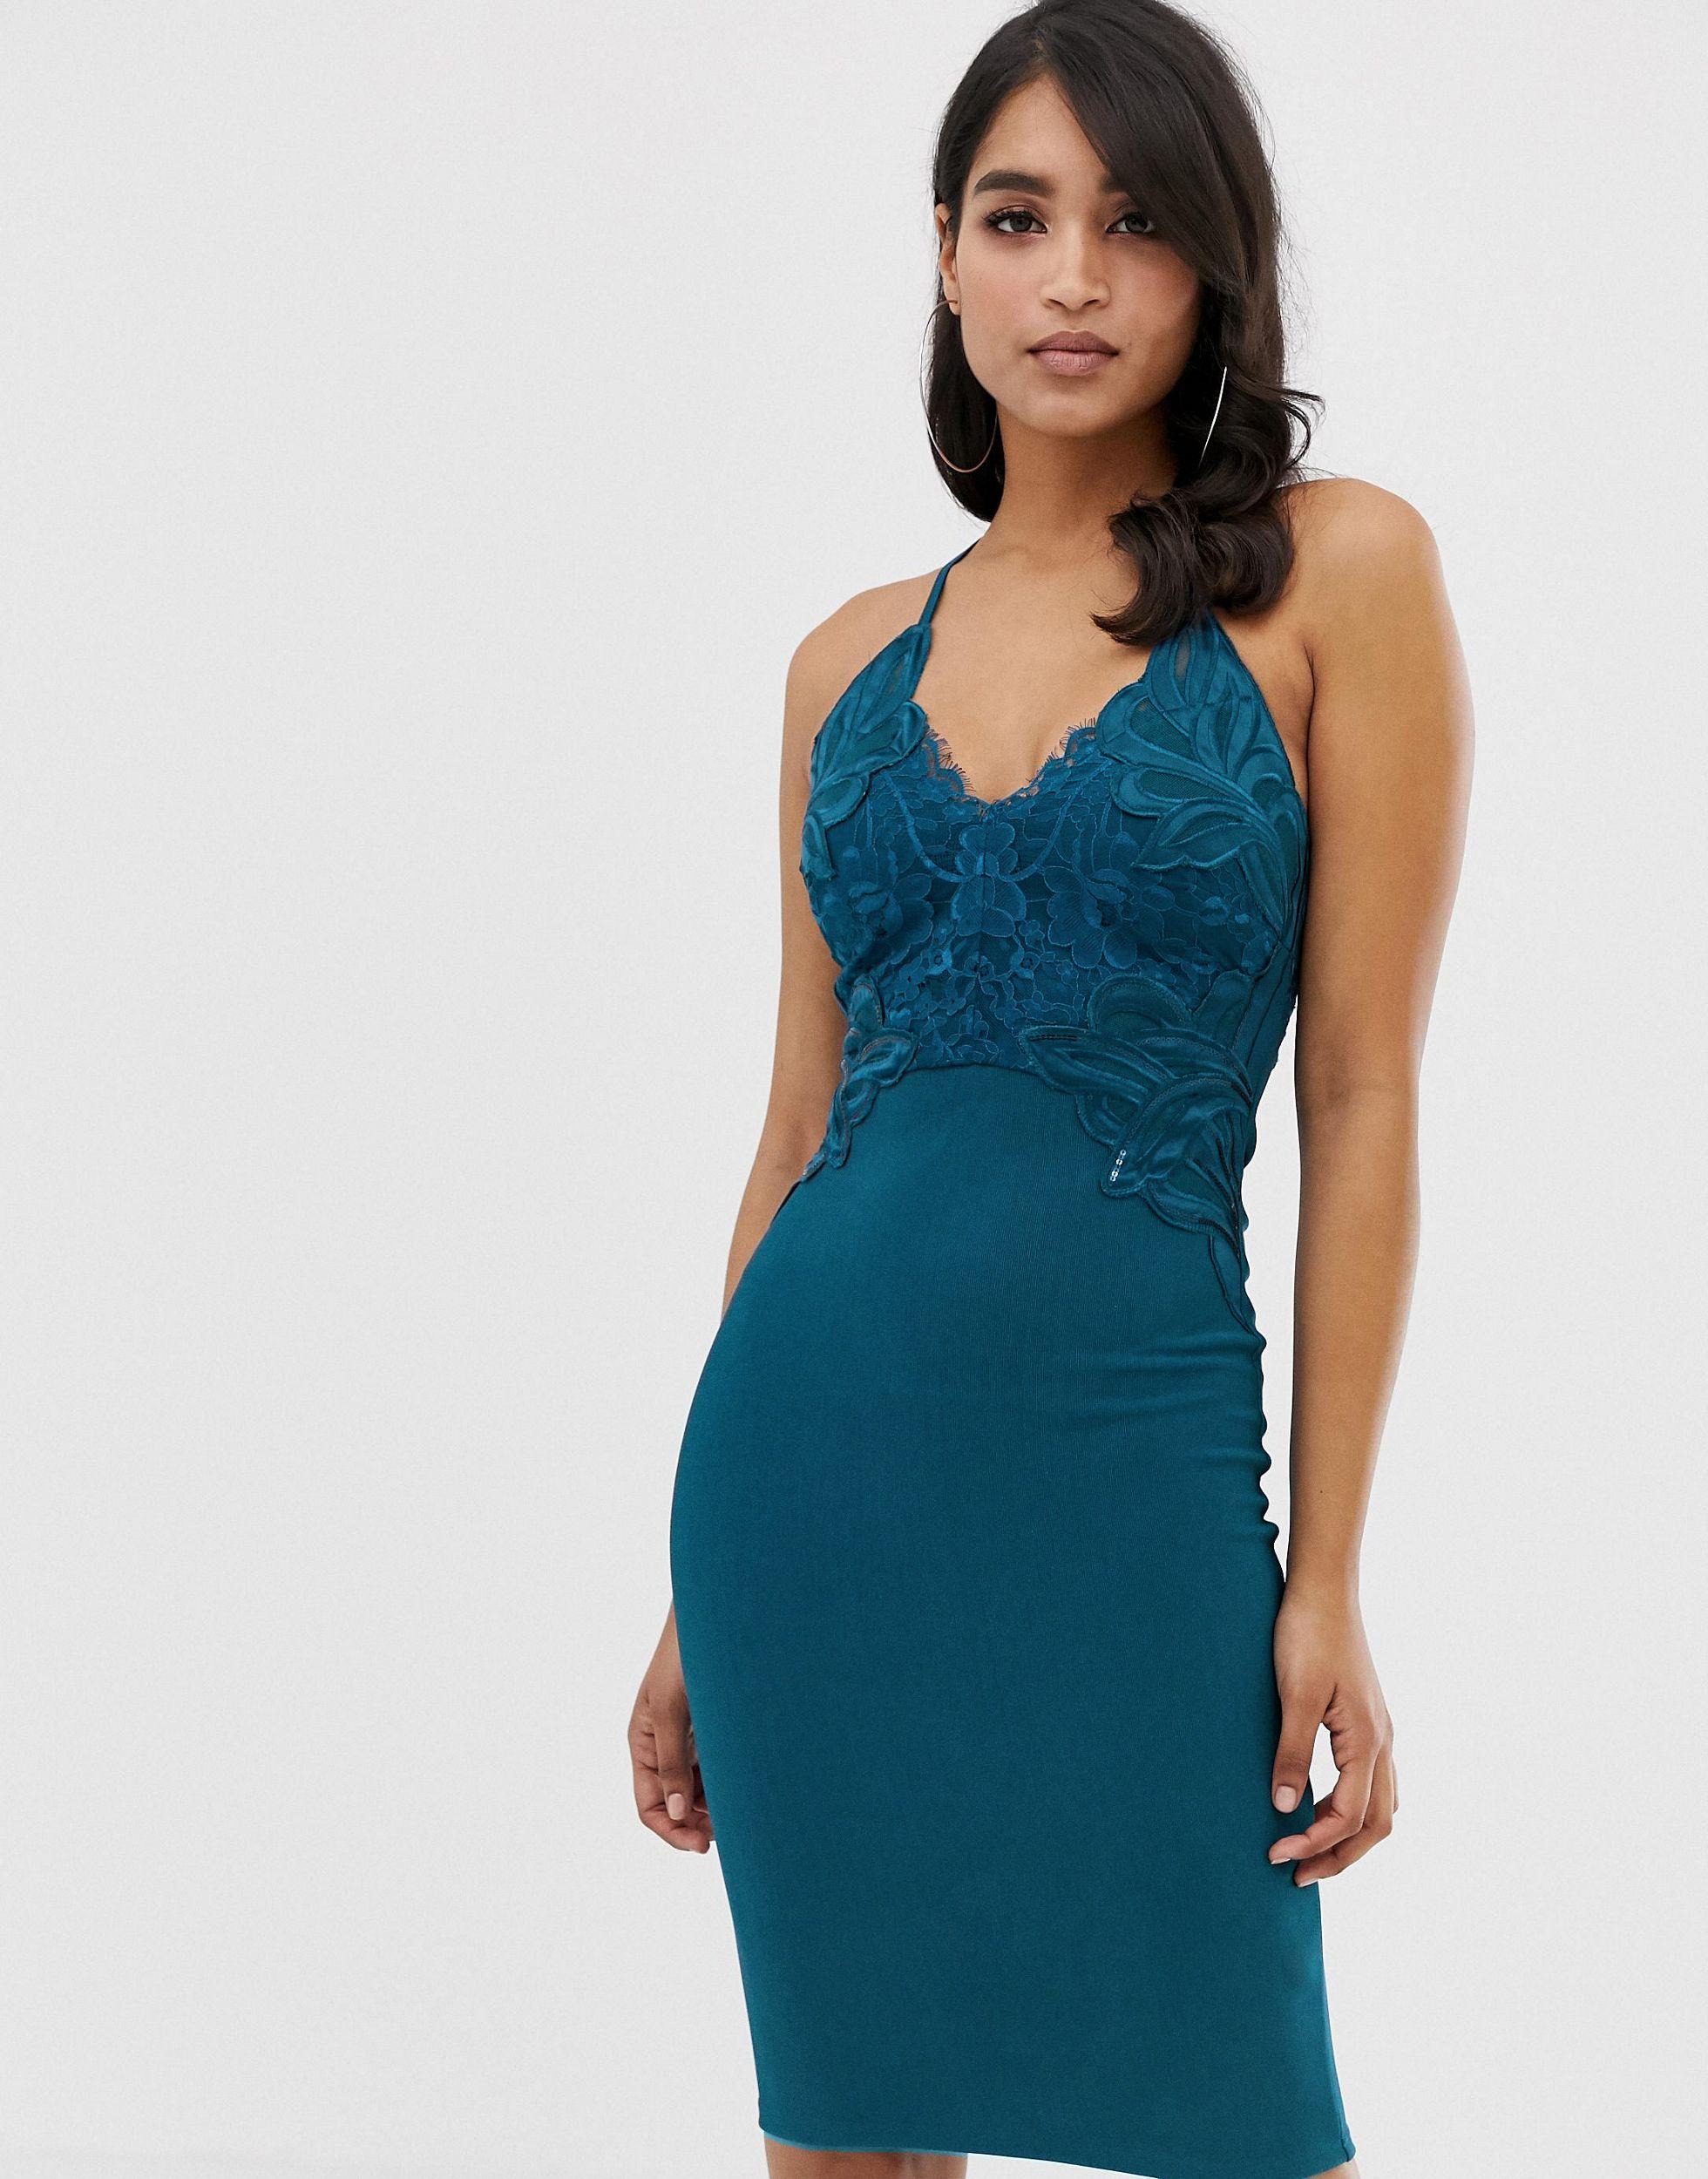 Lipsy Floral Applique High Neck Bodycon Dress In Teal in Blue | Lyst